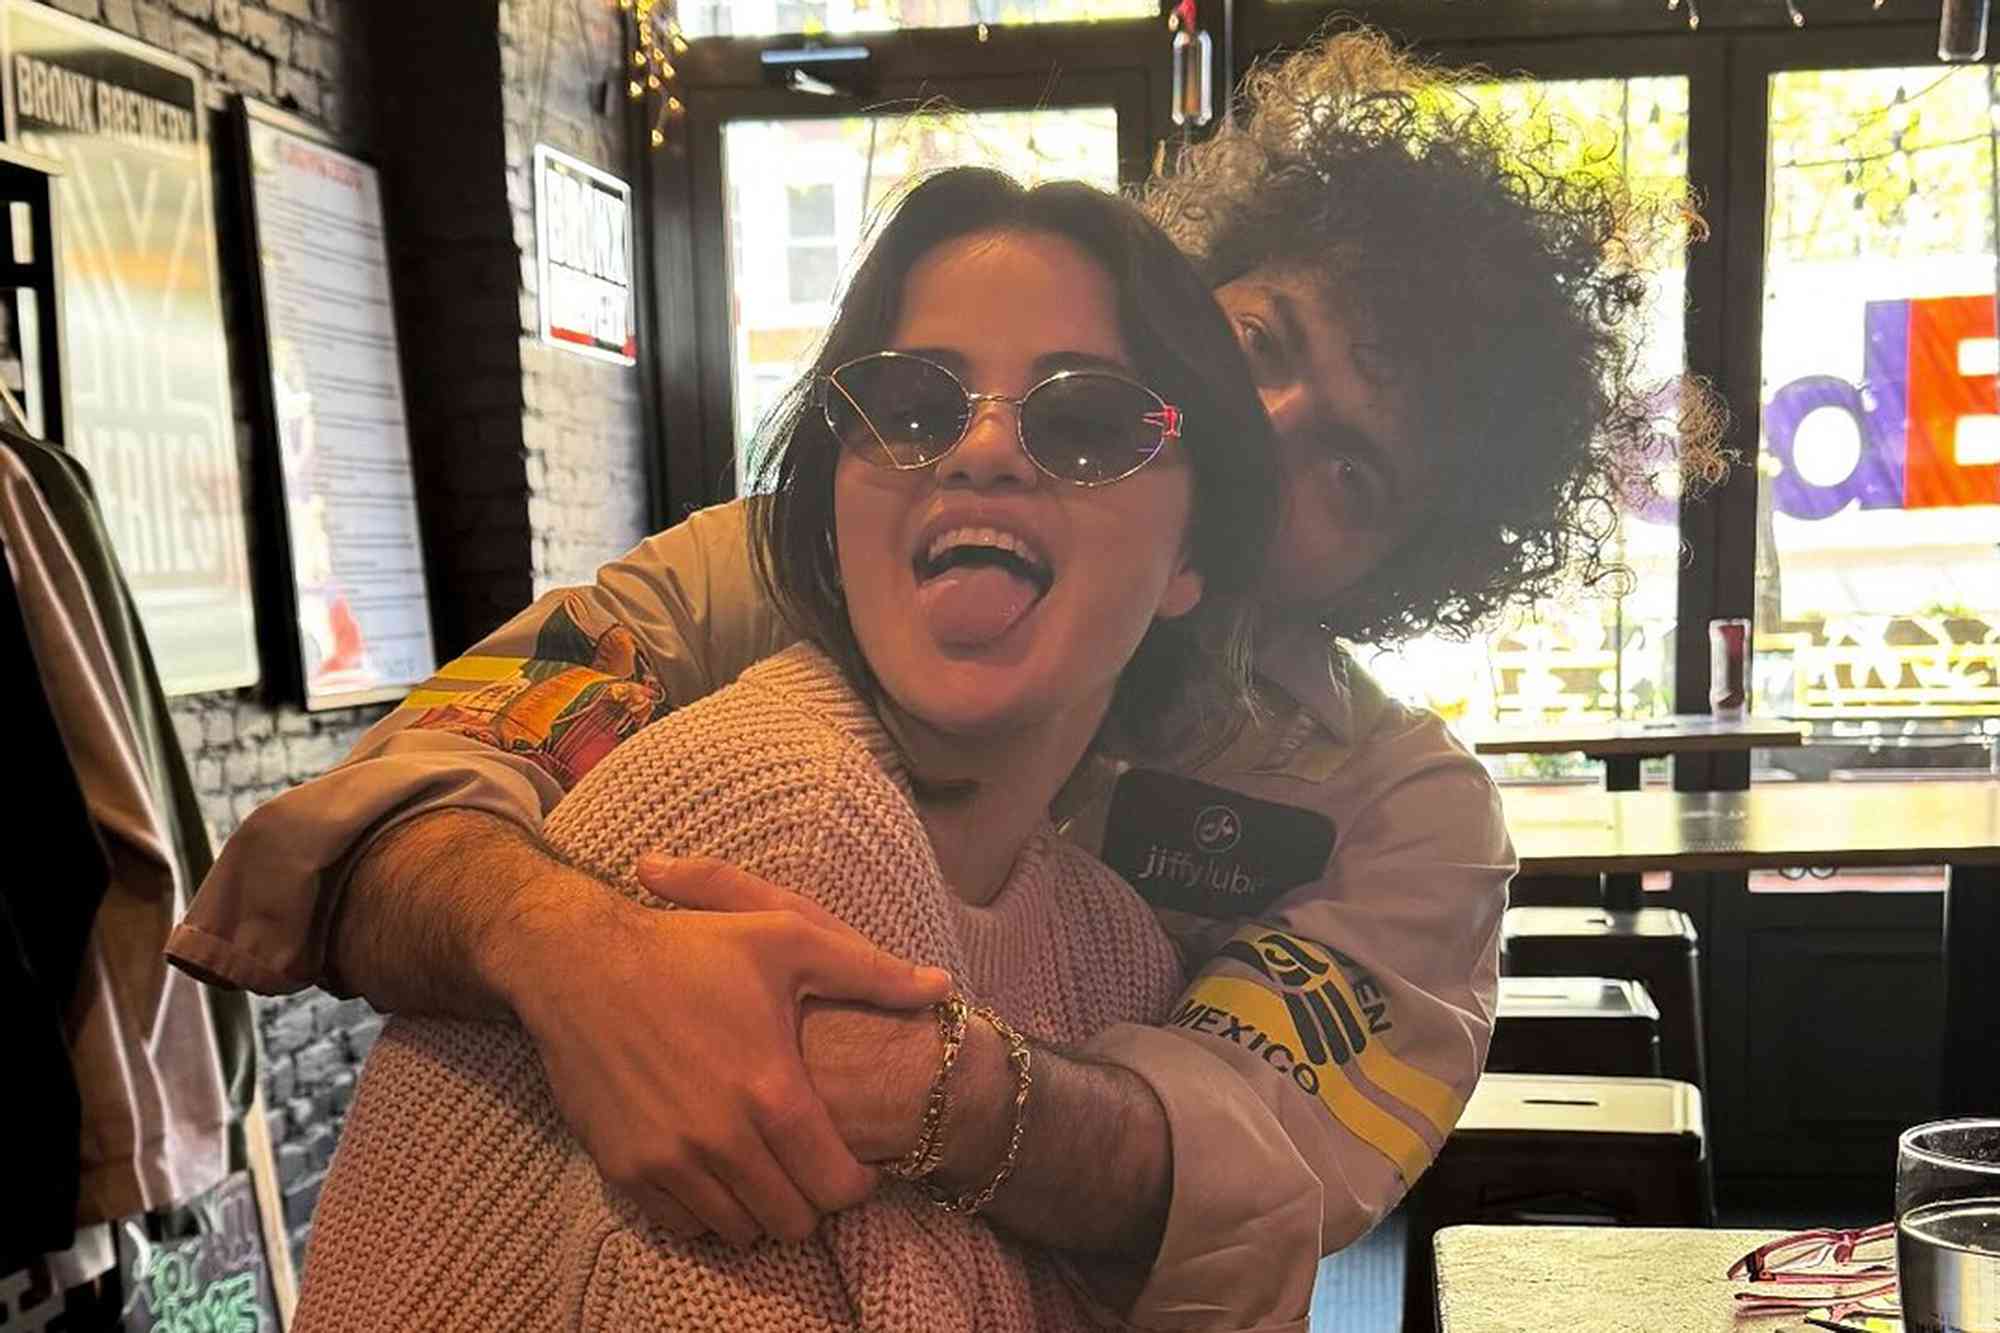 Selena Gomez Makes a Silly Face as She Cuddles Up to Boyfriend Benny Blanco in Sweet New Photo